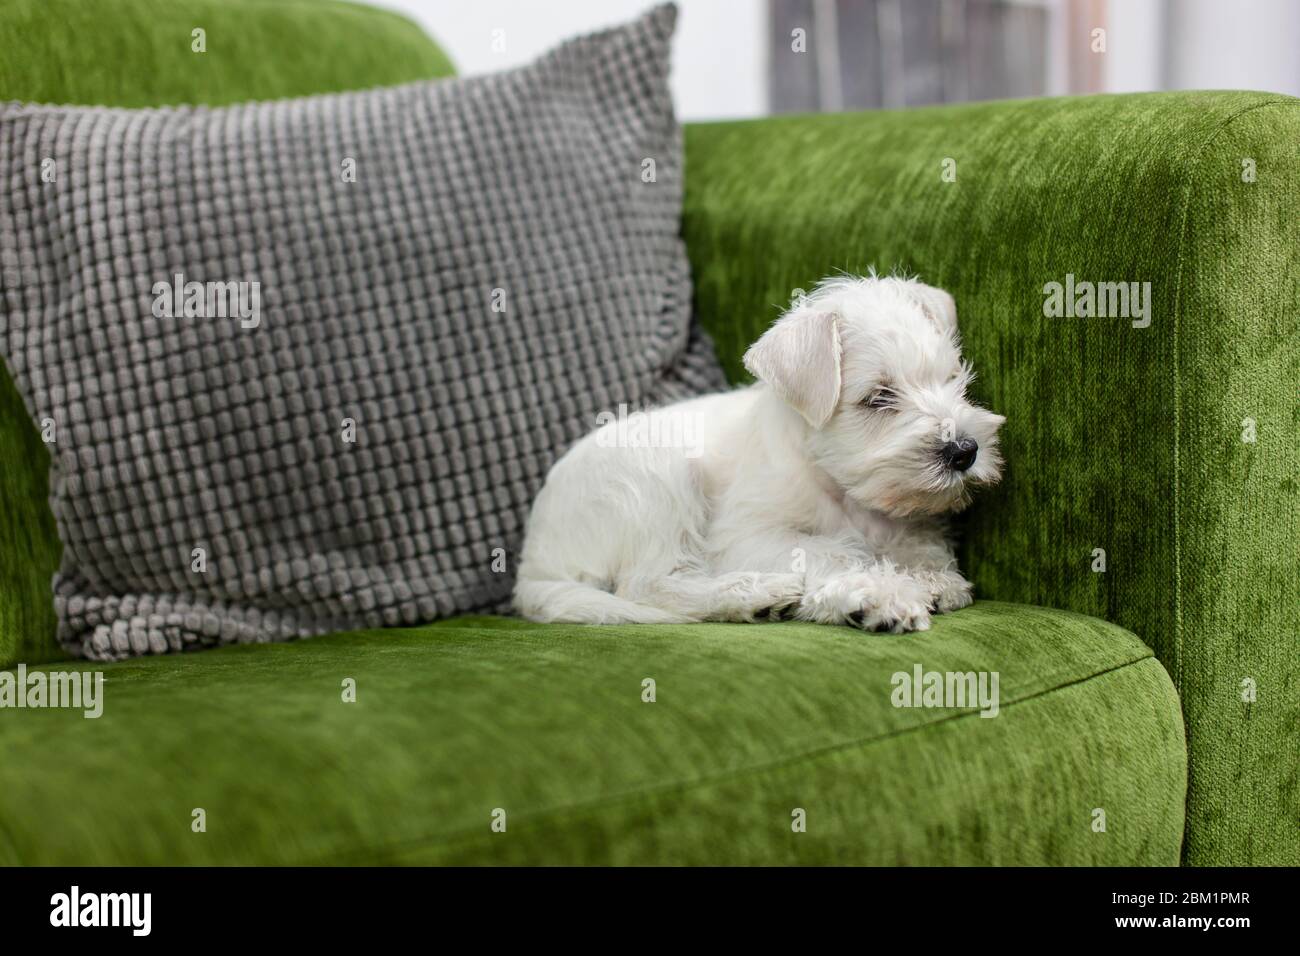 Little white miniature schnauzer puppy laying on green couch. The dog is looking to camera right. Stock Photo